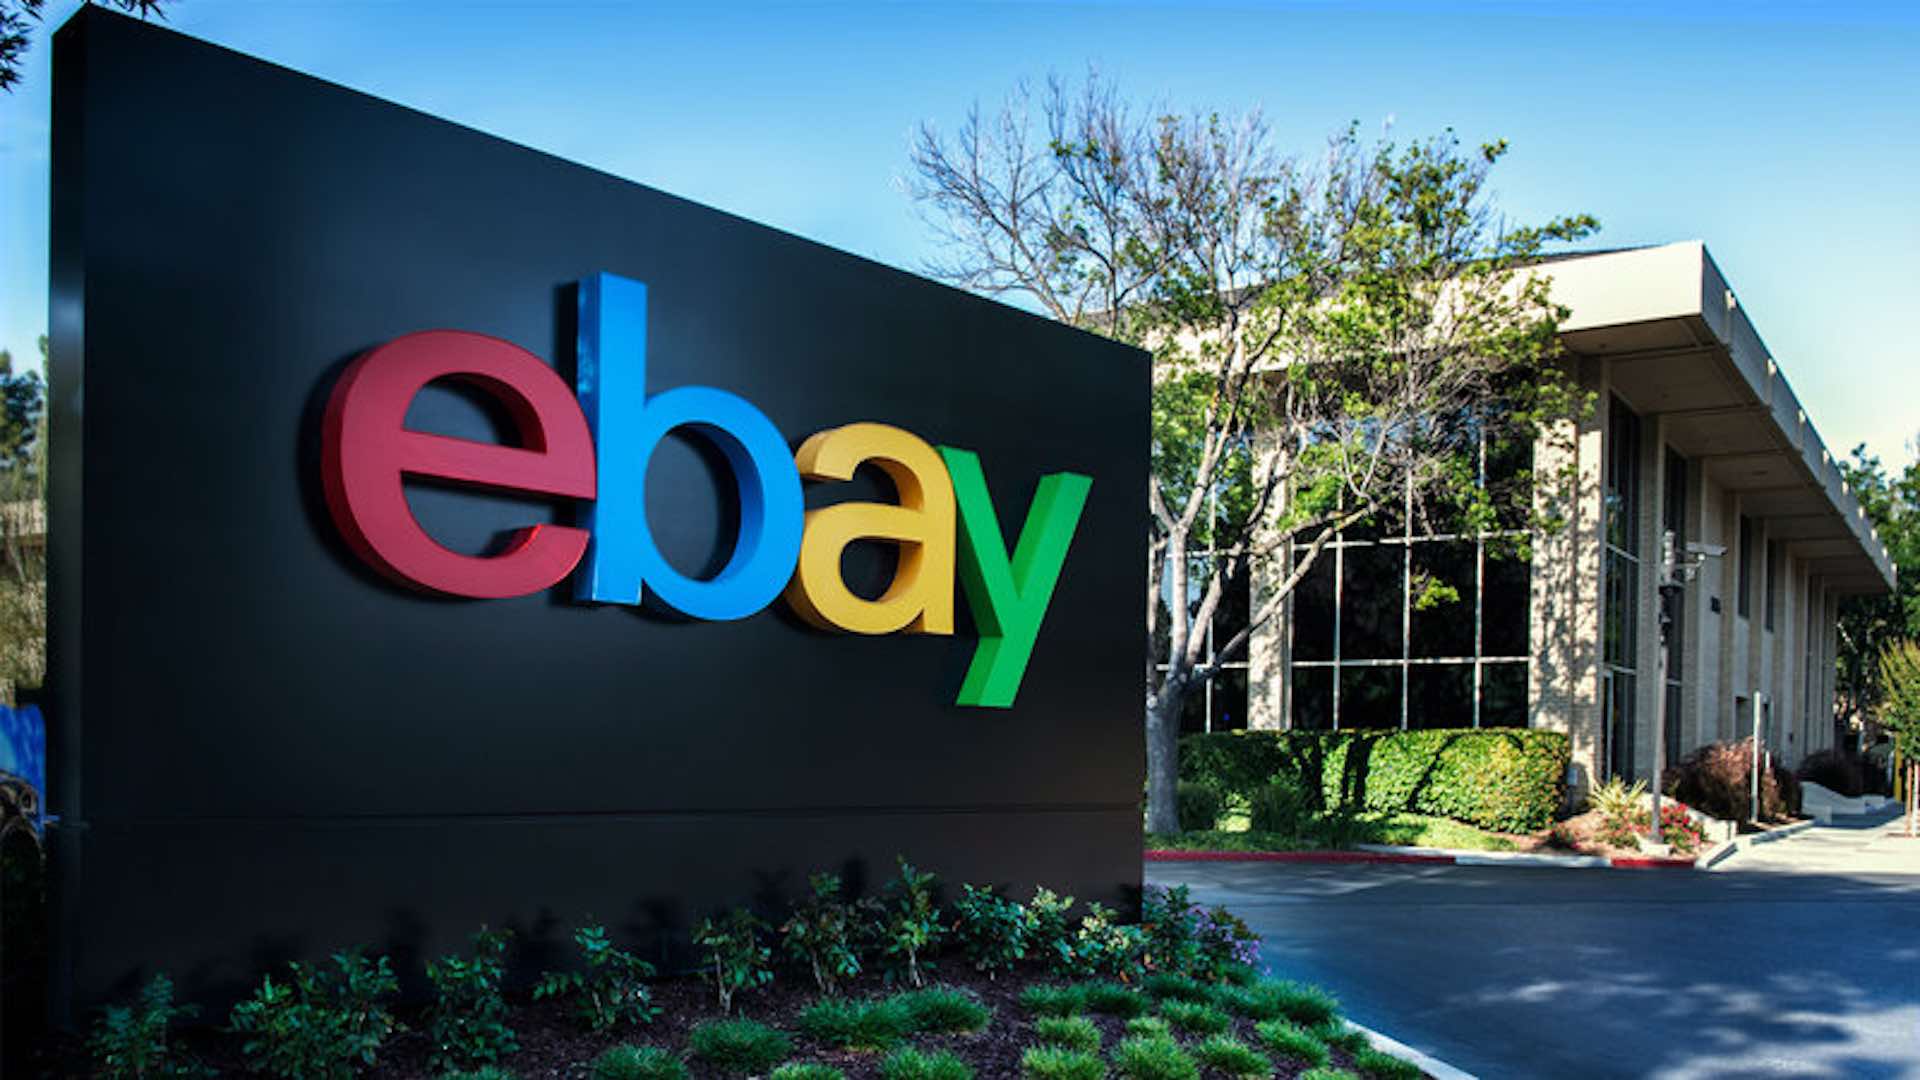 Ebay's Web3 division cuts 30% of workforce amid speculation